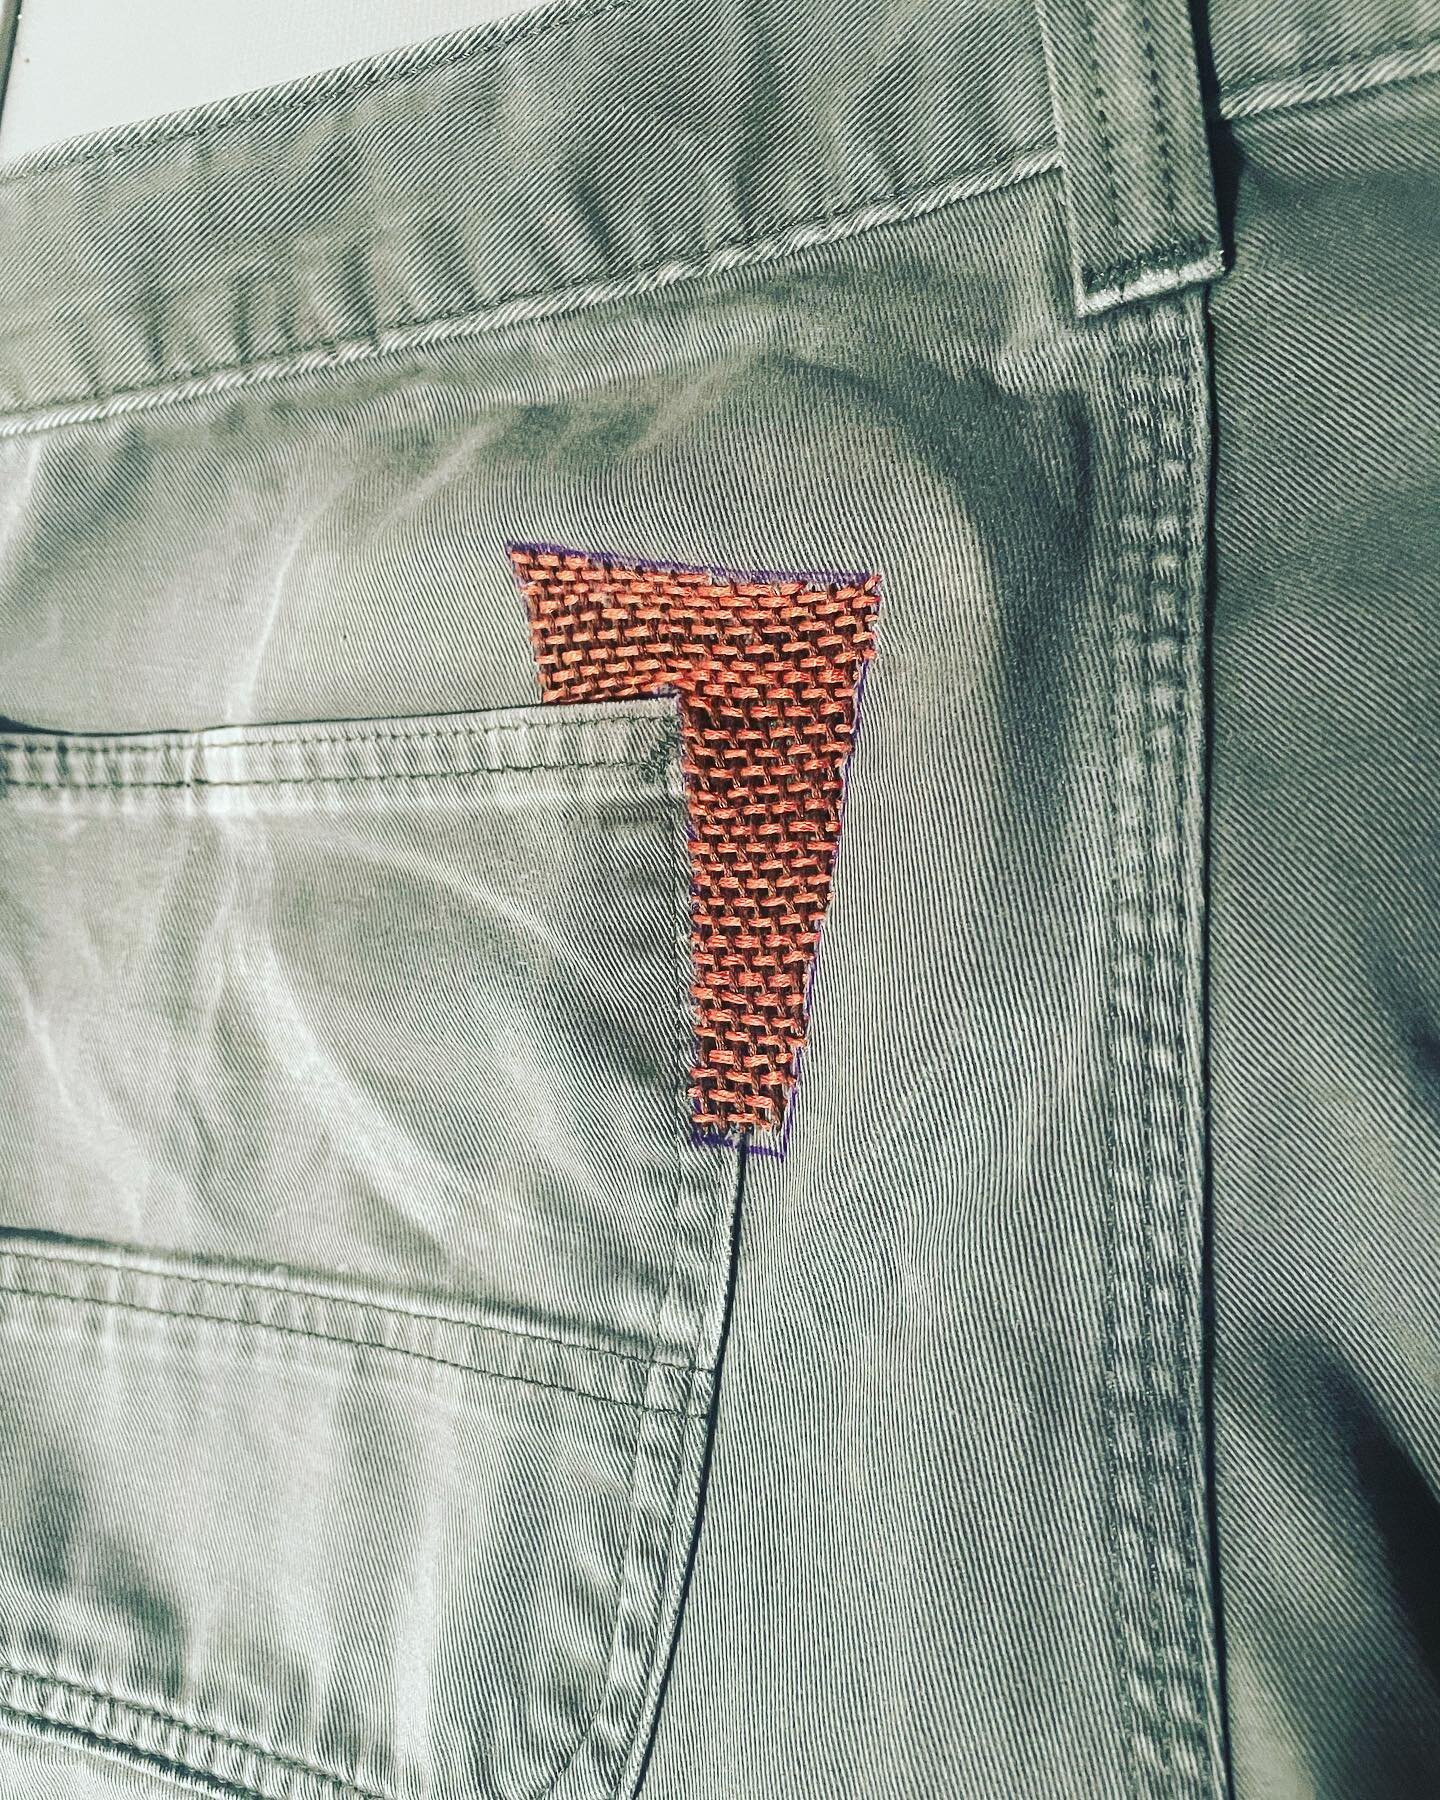 P A T C H I N G is my favorite way to extend the life of my clothing! I&rsquo;m so proud to say that my boyfriend took it upon himself to make this woven patch on his @carhartt work pants. He is constantly tearing them at the pockets and the belt loo